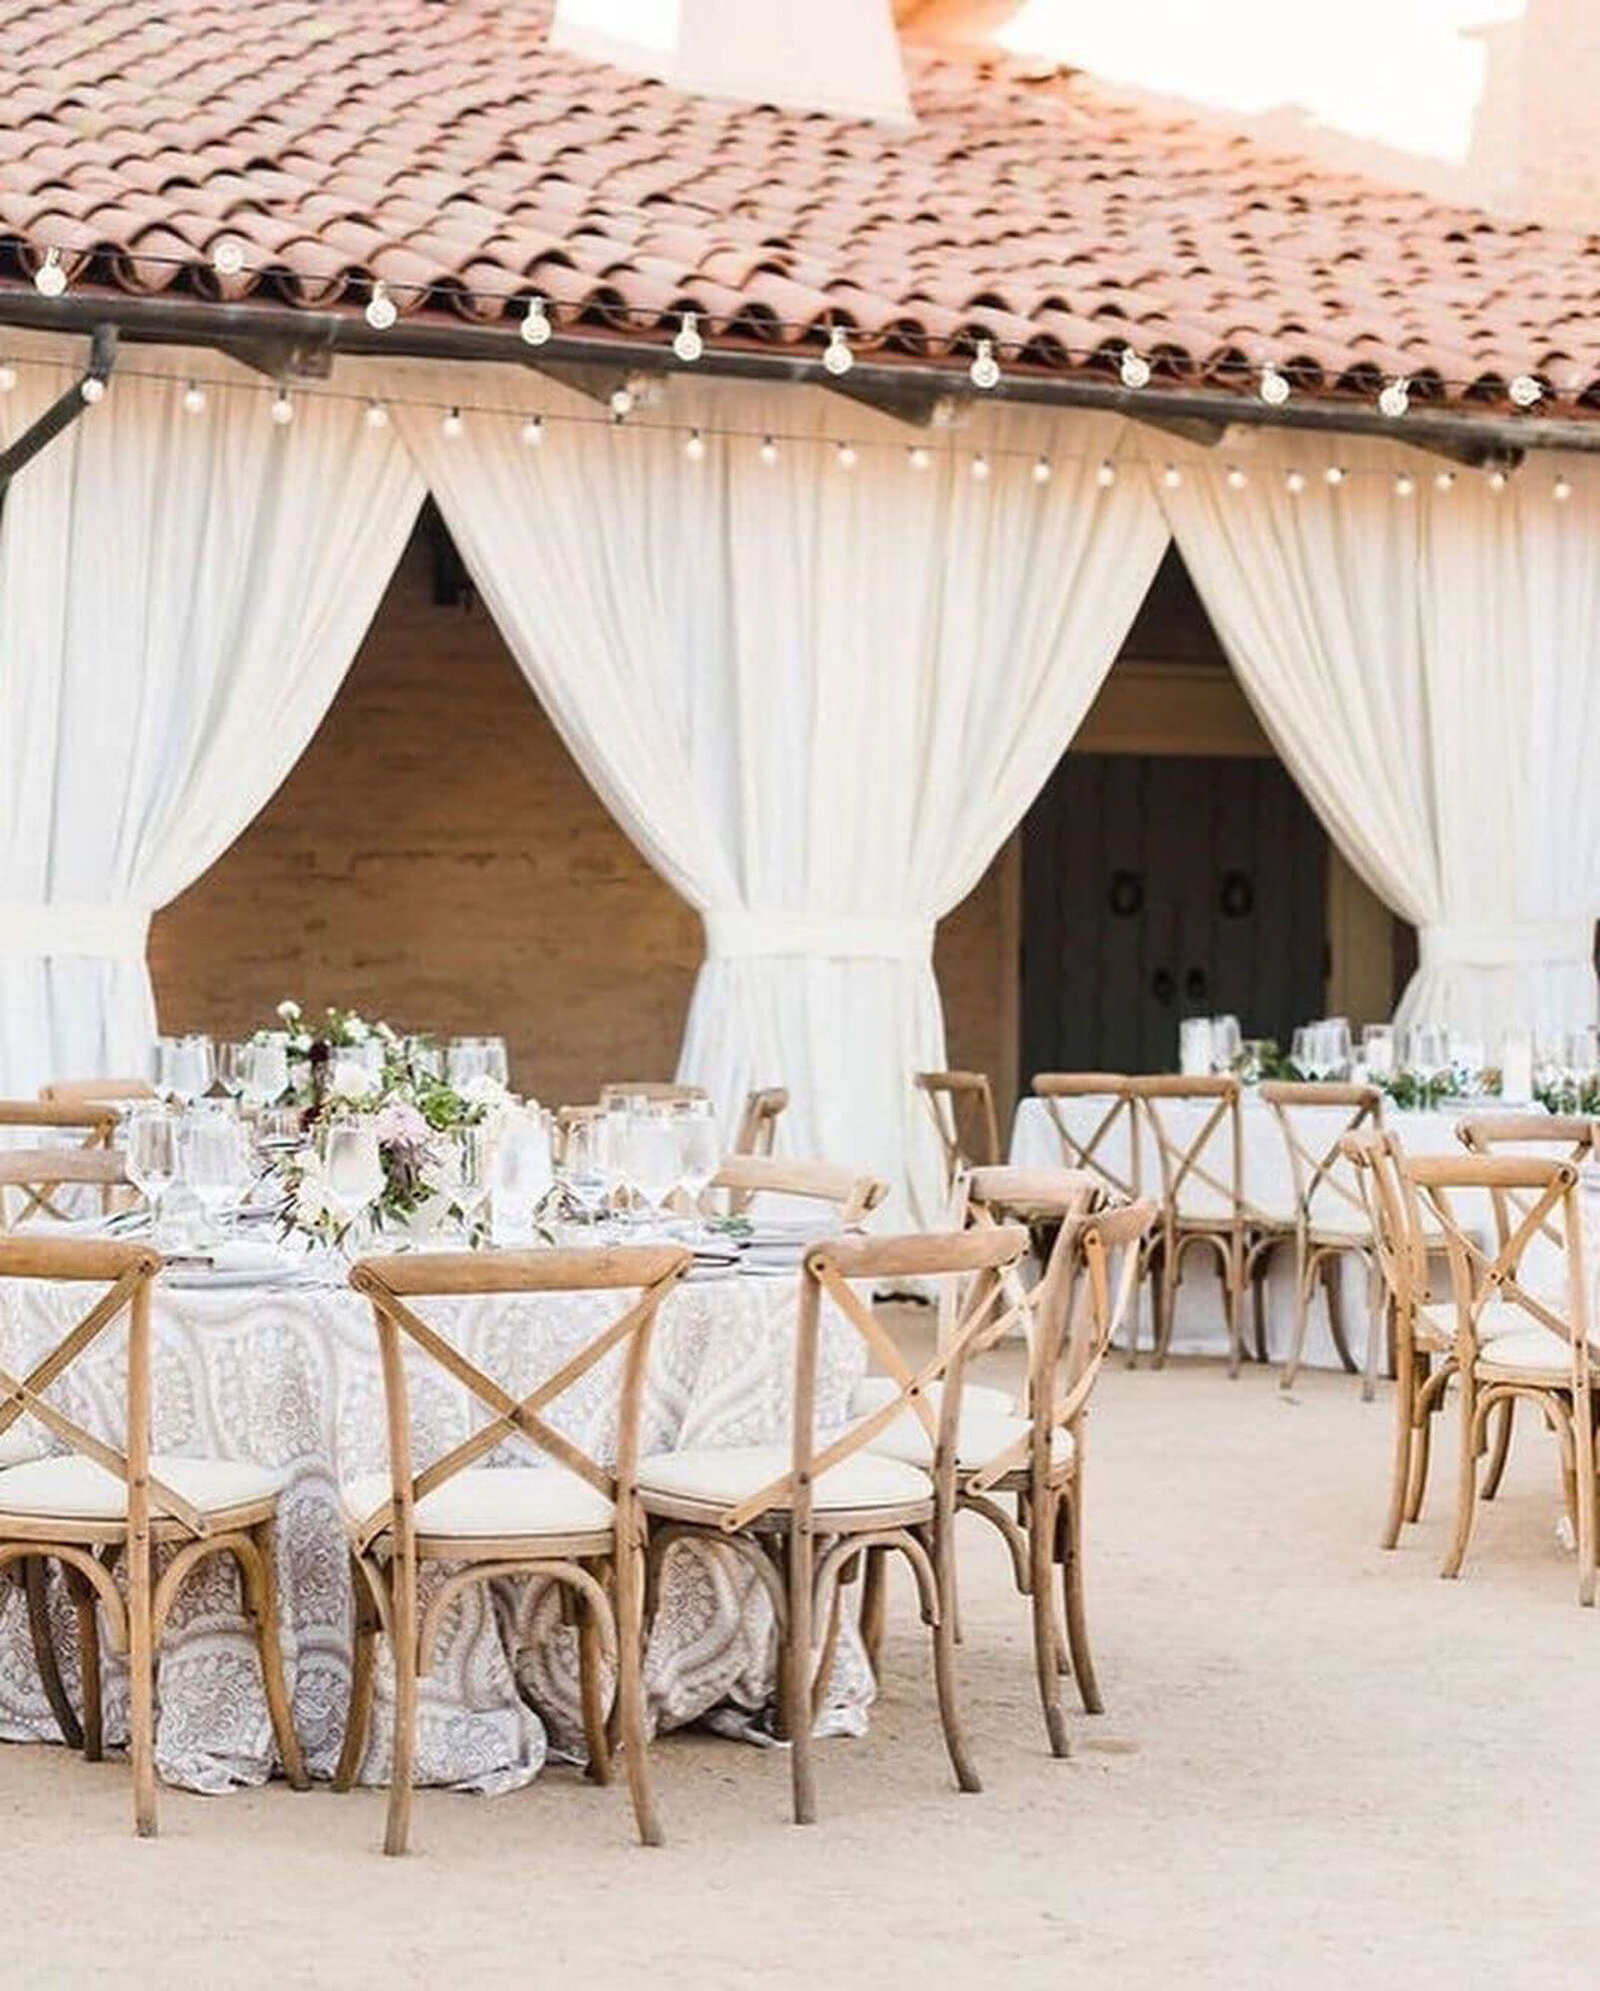 Elegant wedding set-up of tables and chairs in an outside area